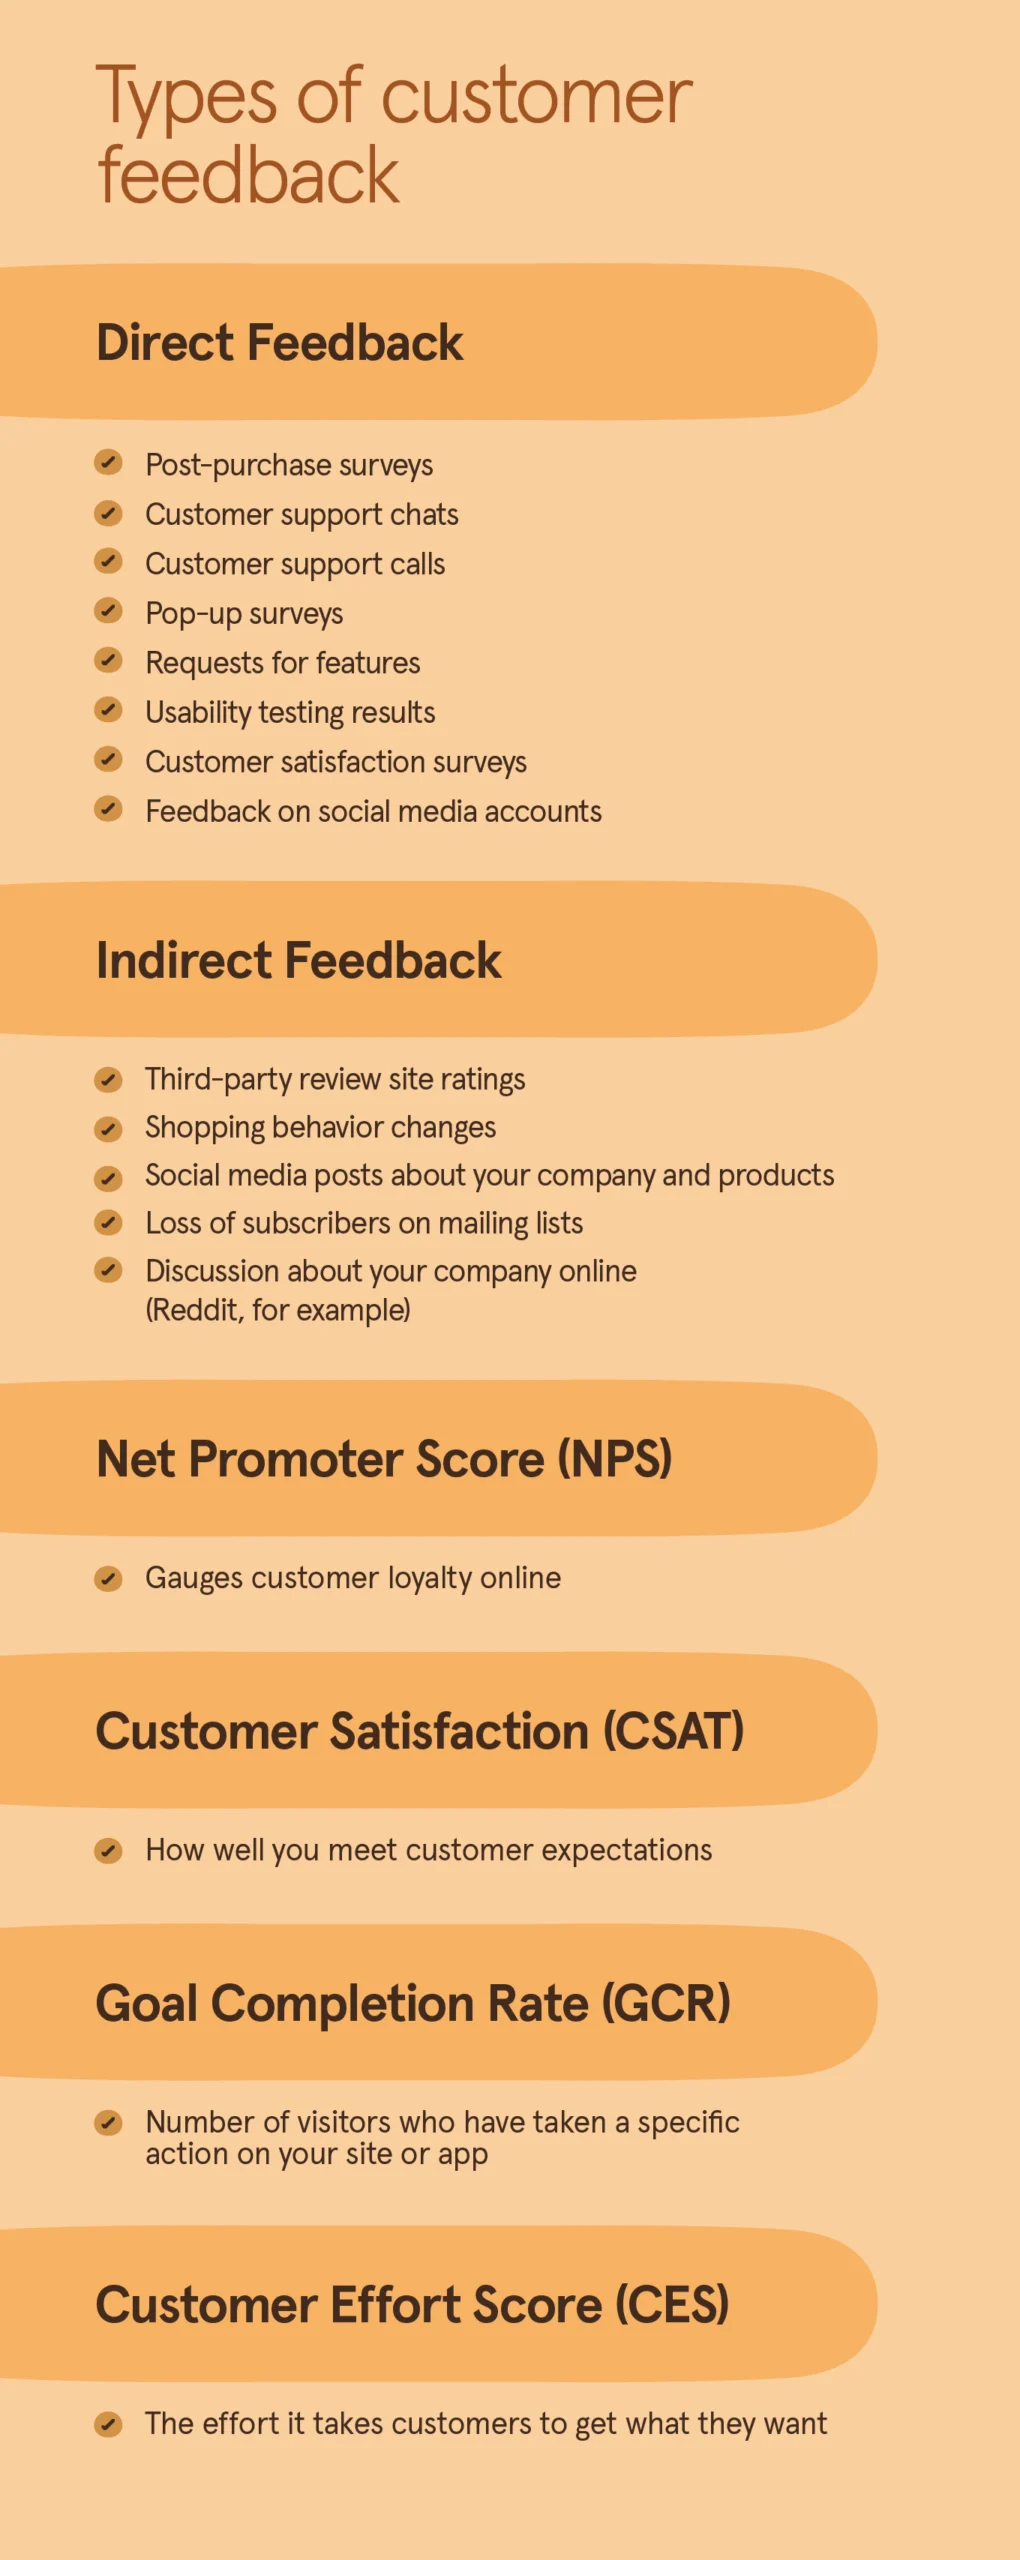 A chart showing the differences between direct and indirect customer feedback.